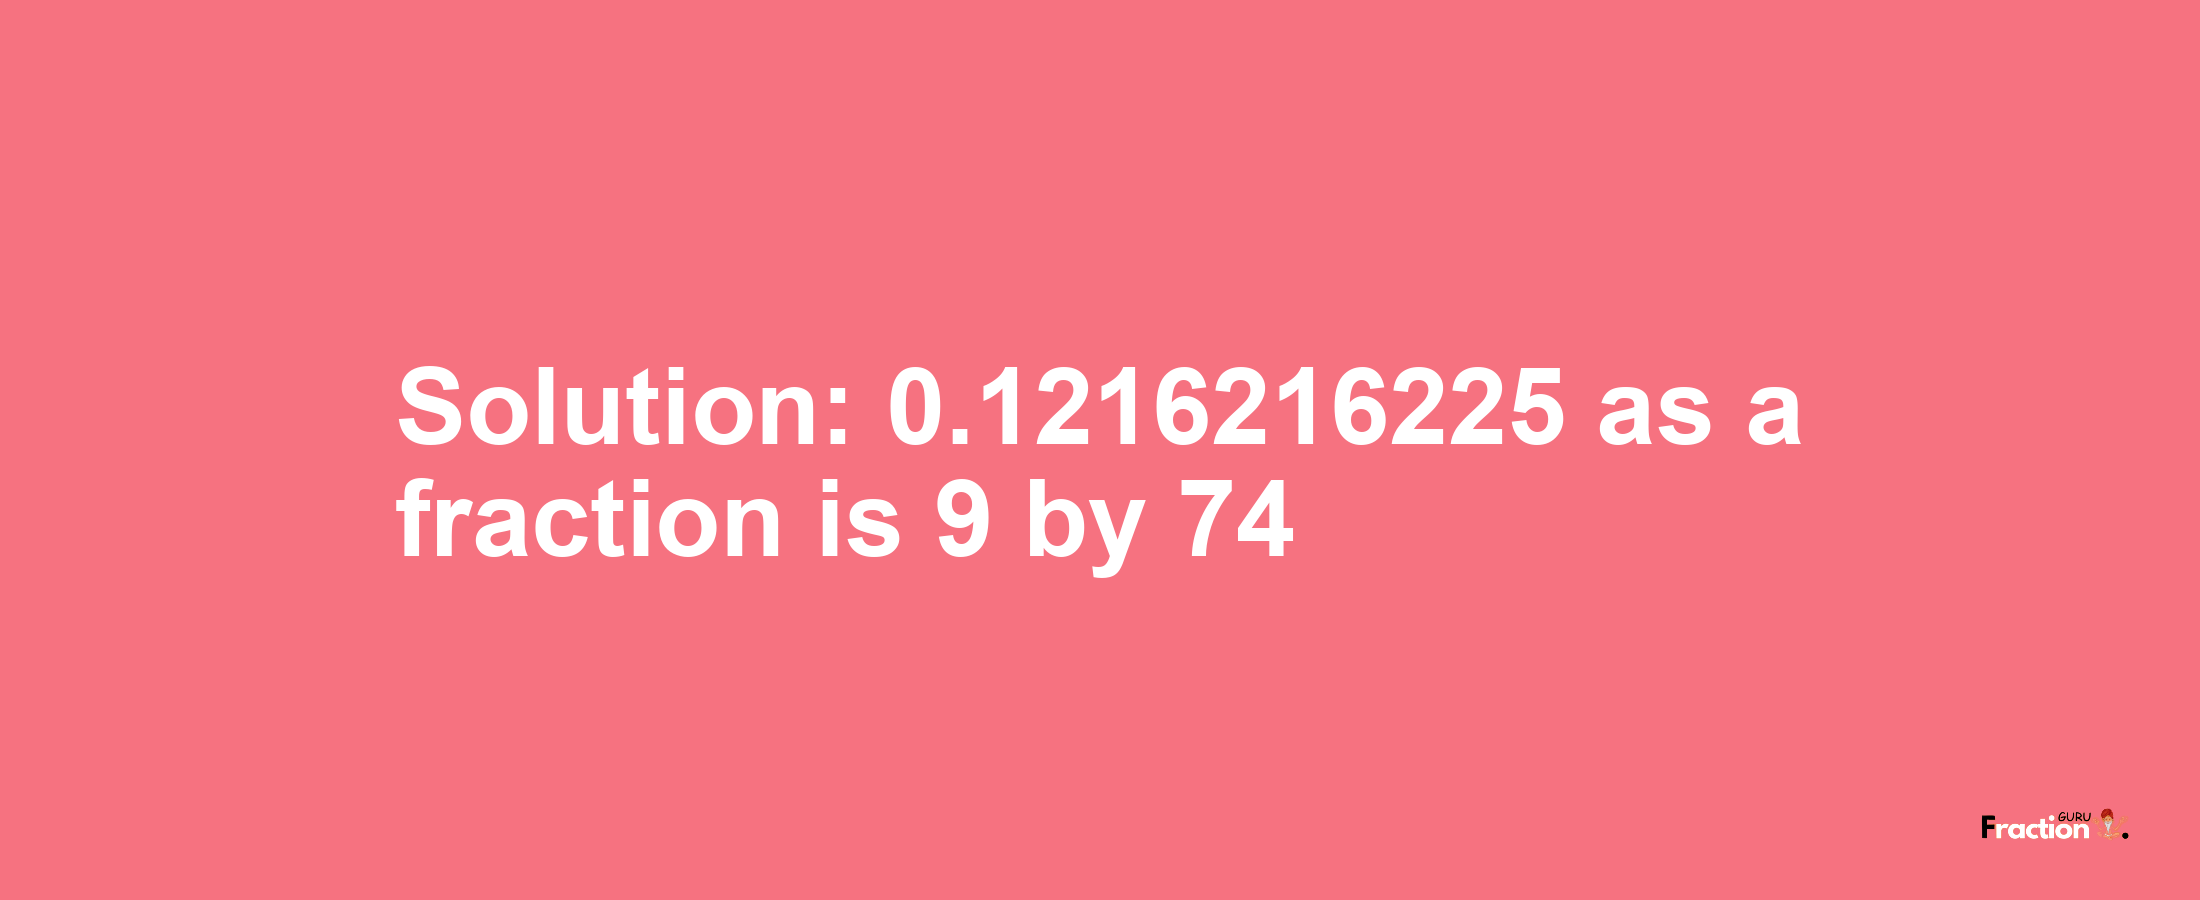 Solution:0.1216216225 as a fraction is 9/74